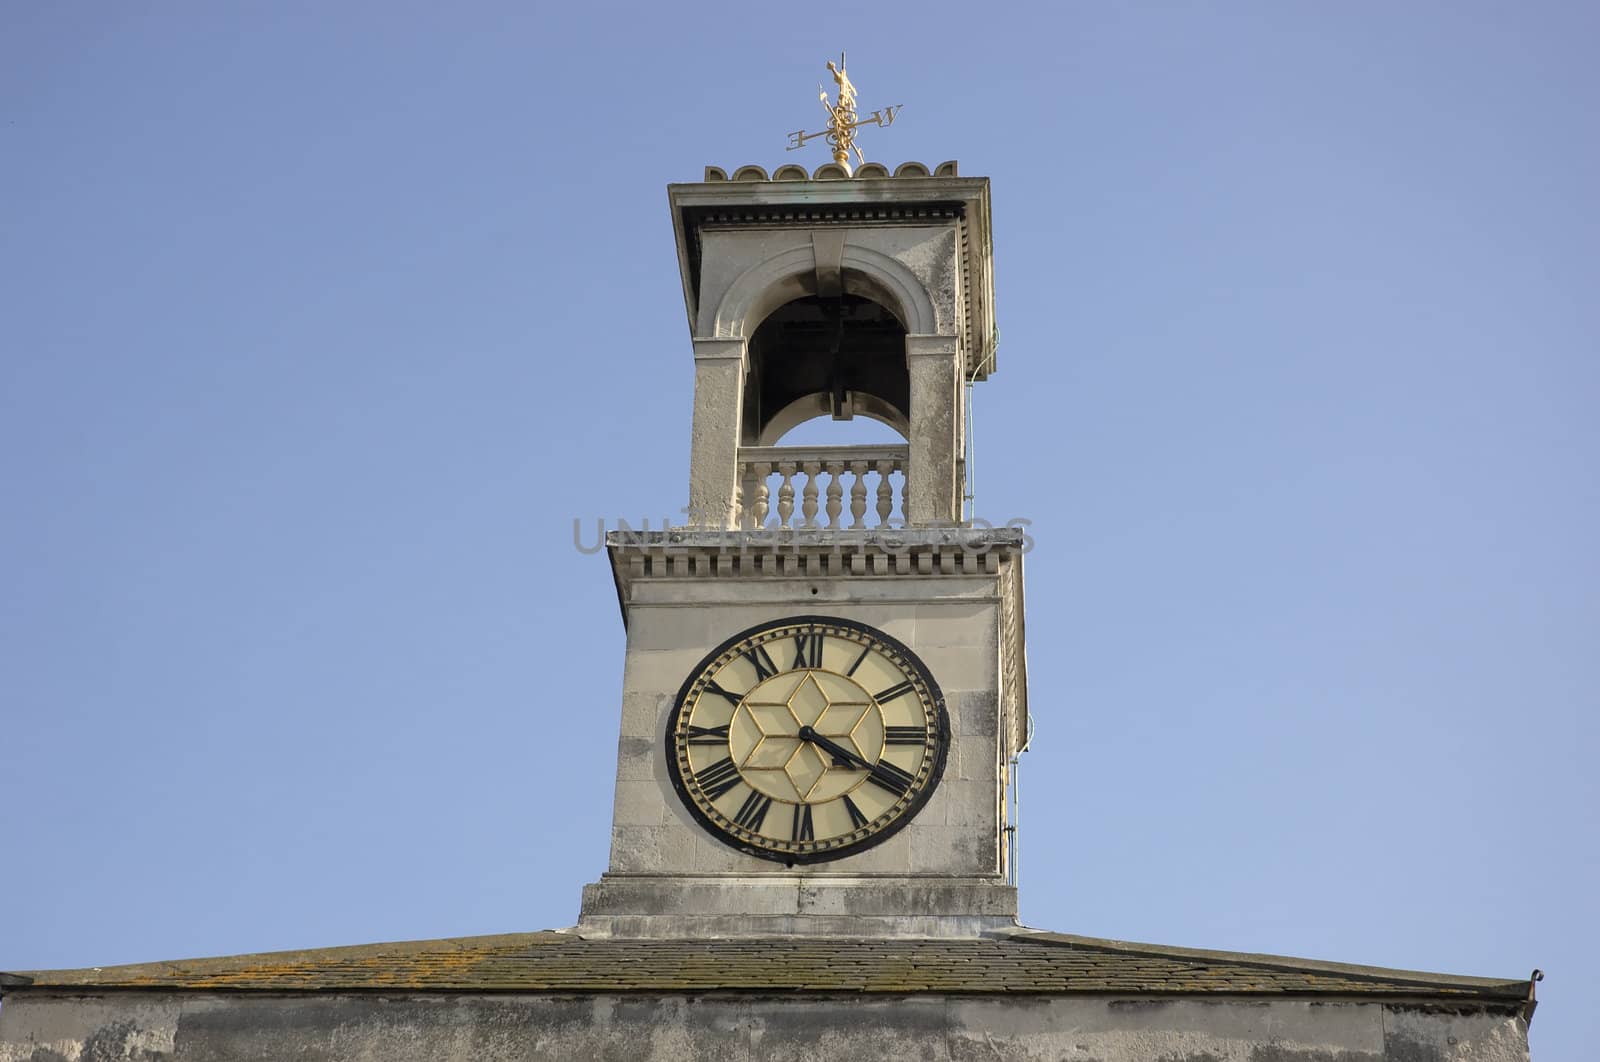 A clock tower with a weather vein on top